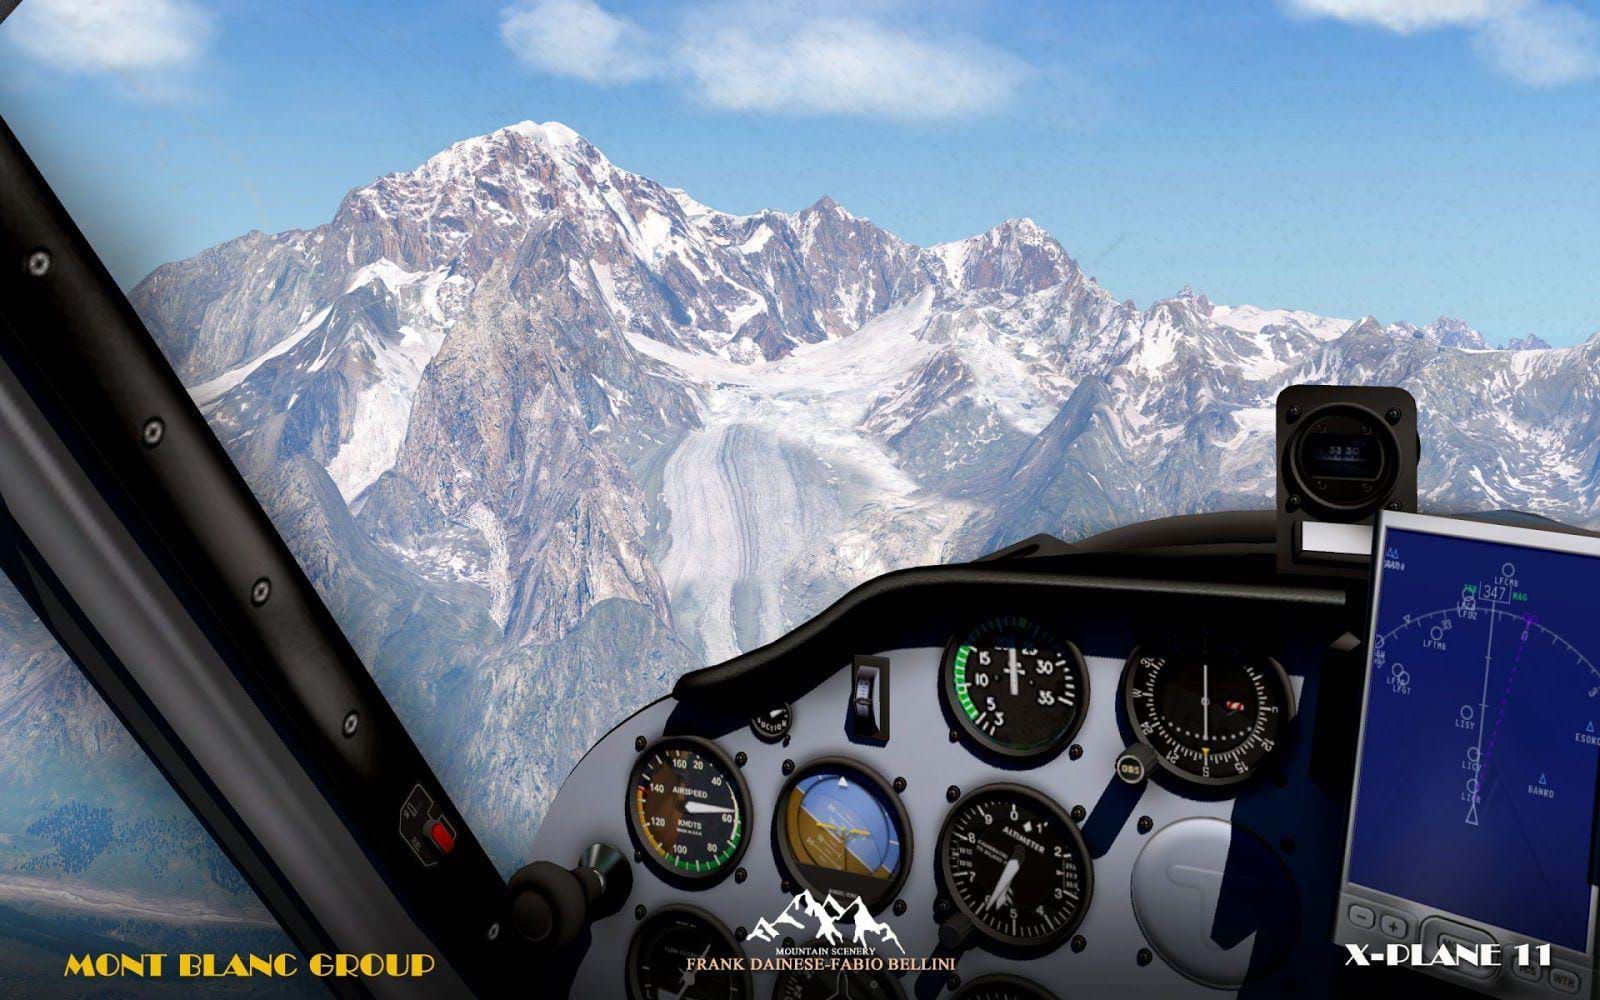 Frank Dainese and Fabio Bellini Mont Blanc for X-Plane